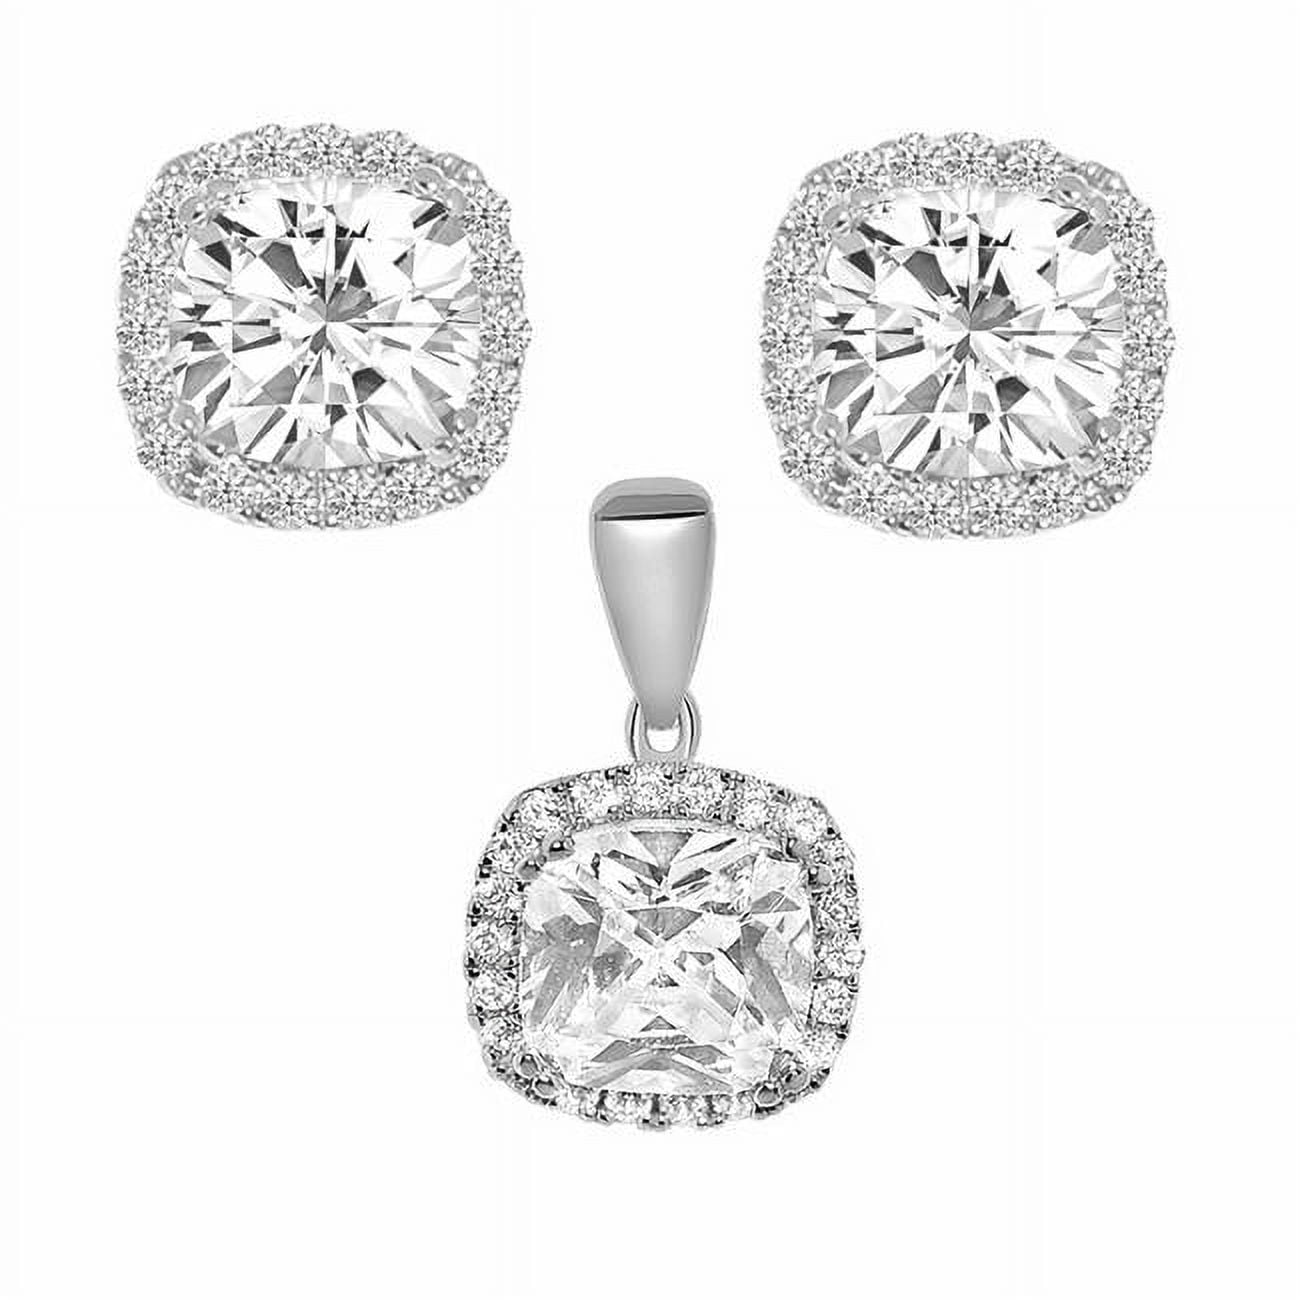 Picture of Precious Stars ER1694-PT2489 14K White Gold Cubic Zirconia Halo Earring & Pendant Set